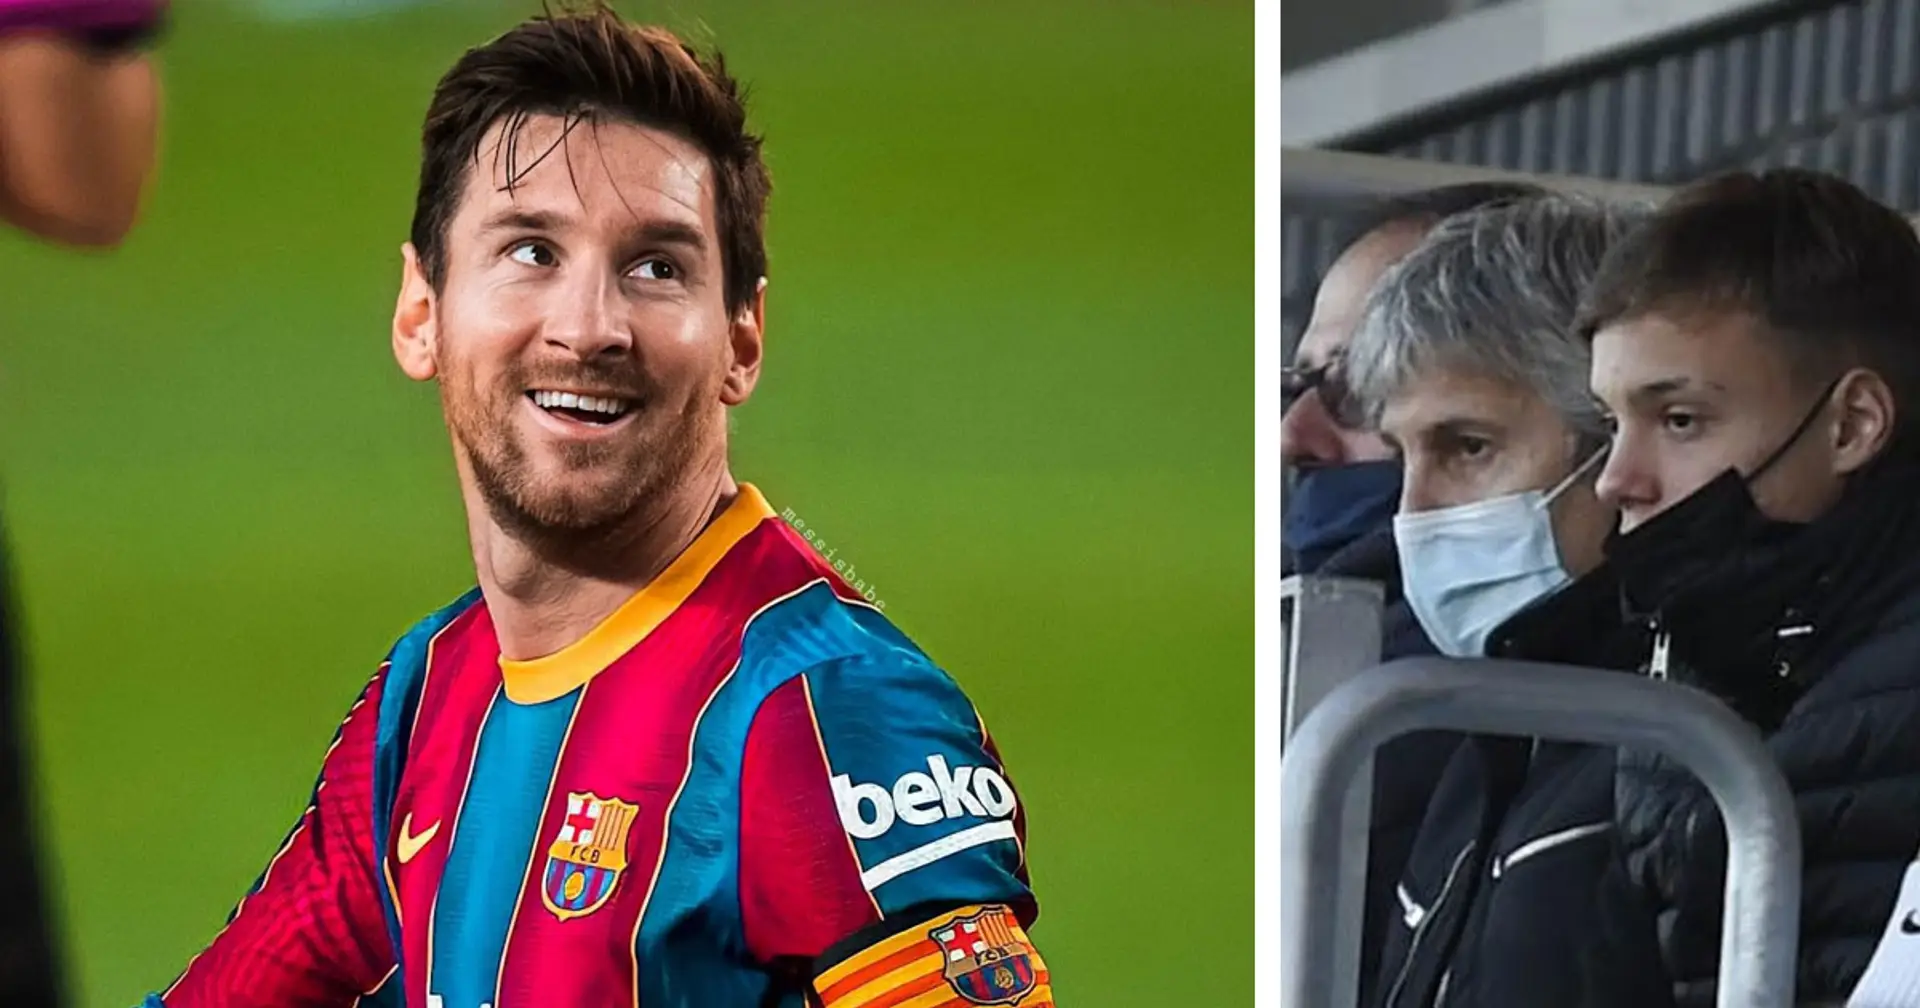 Messi's father spotted in Barcelona, set to meet with club over extension talks soon (reliability: 5 stars)